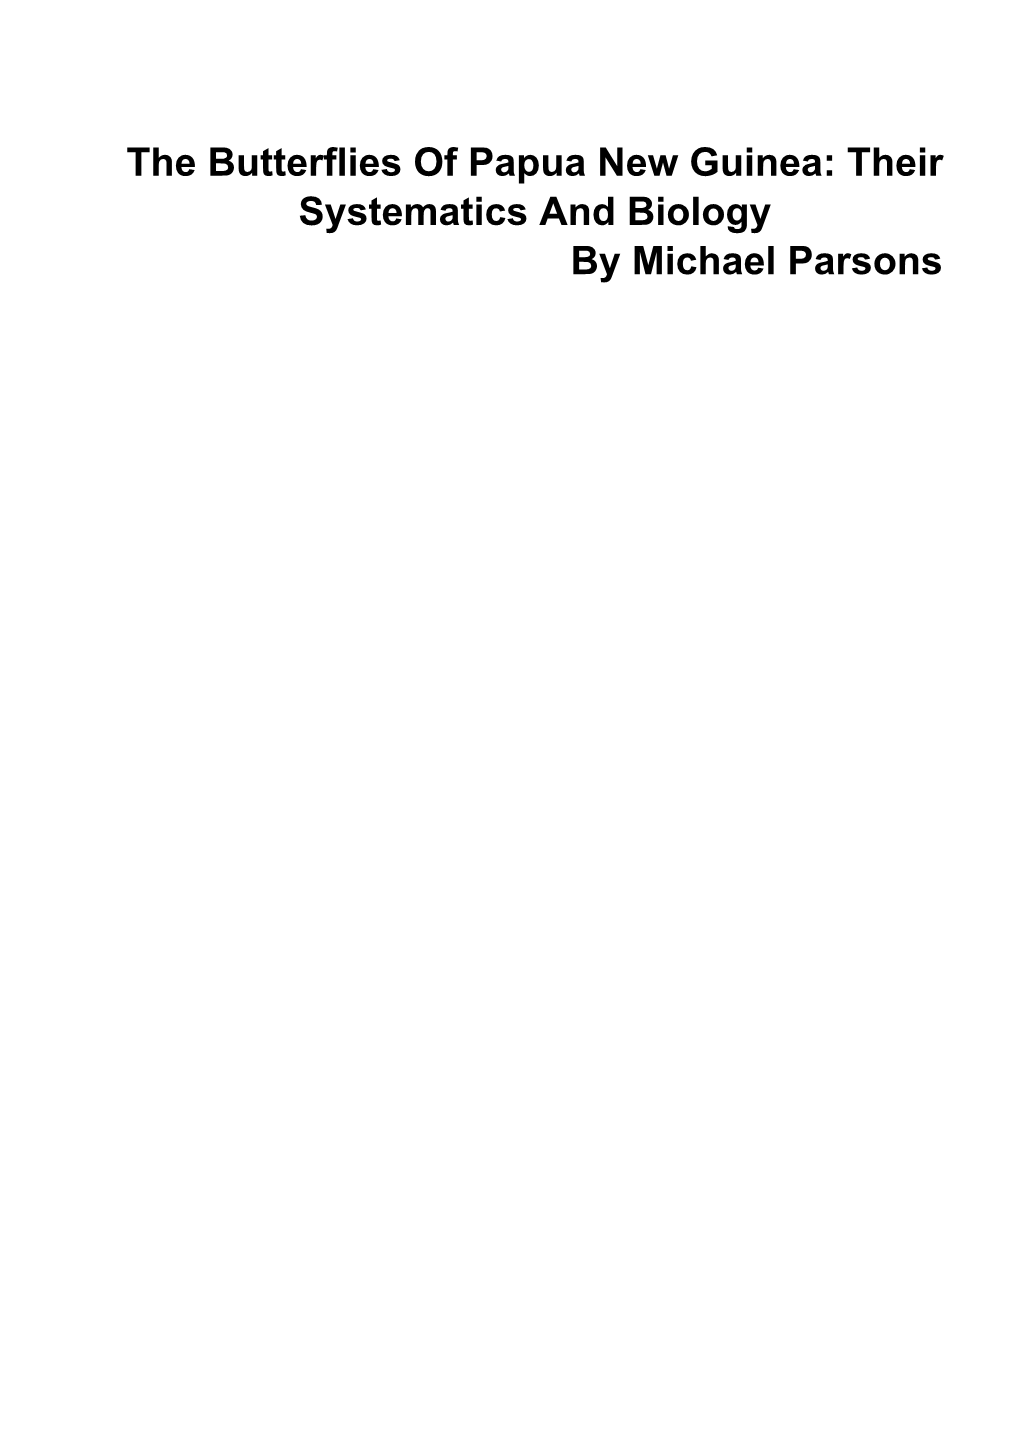 The Butterflies of Papua New Guinea: Their Systematics and Biology by Michael Parsons